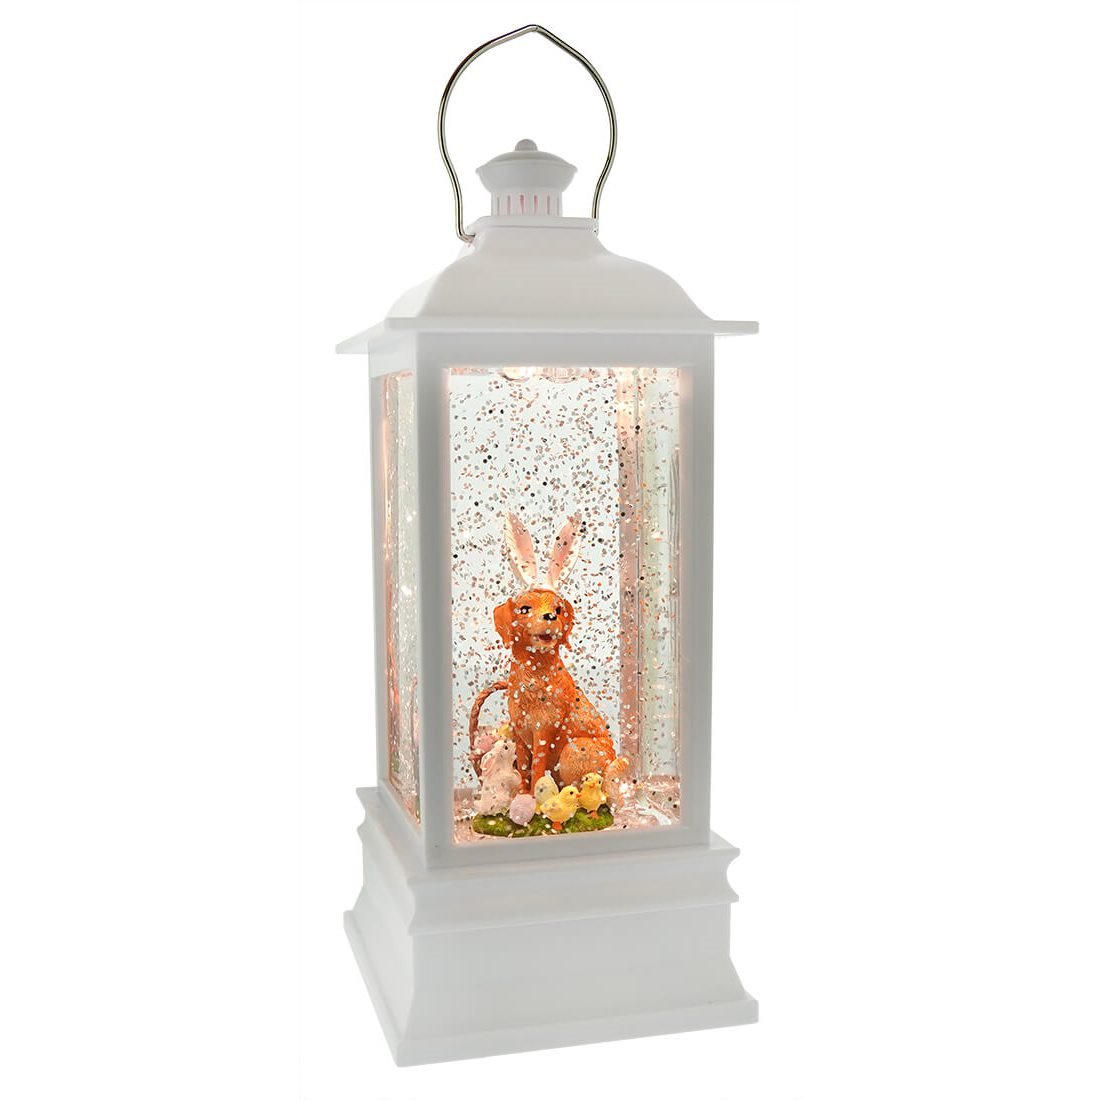 Dog with Bunny Ears Lighted Water Lantern